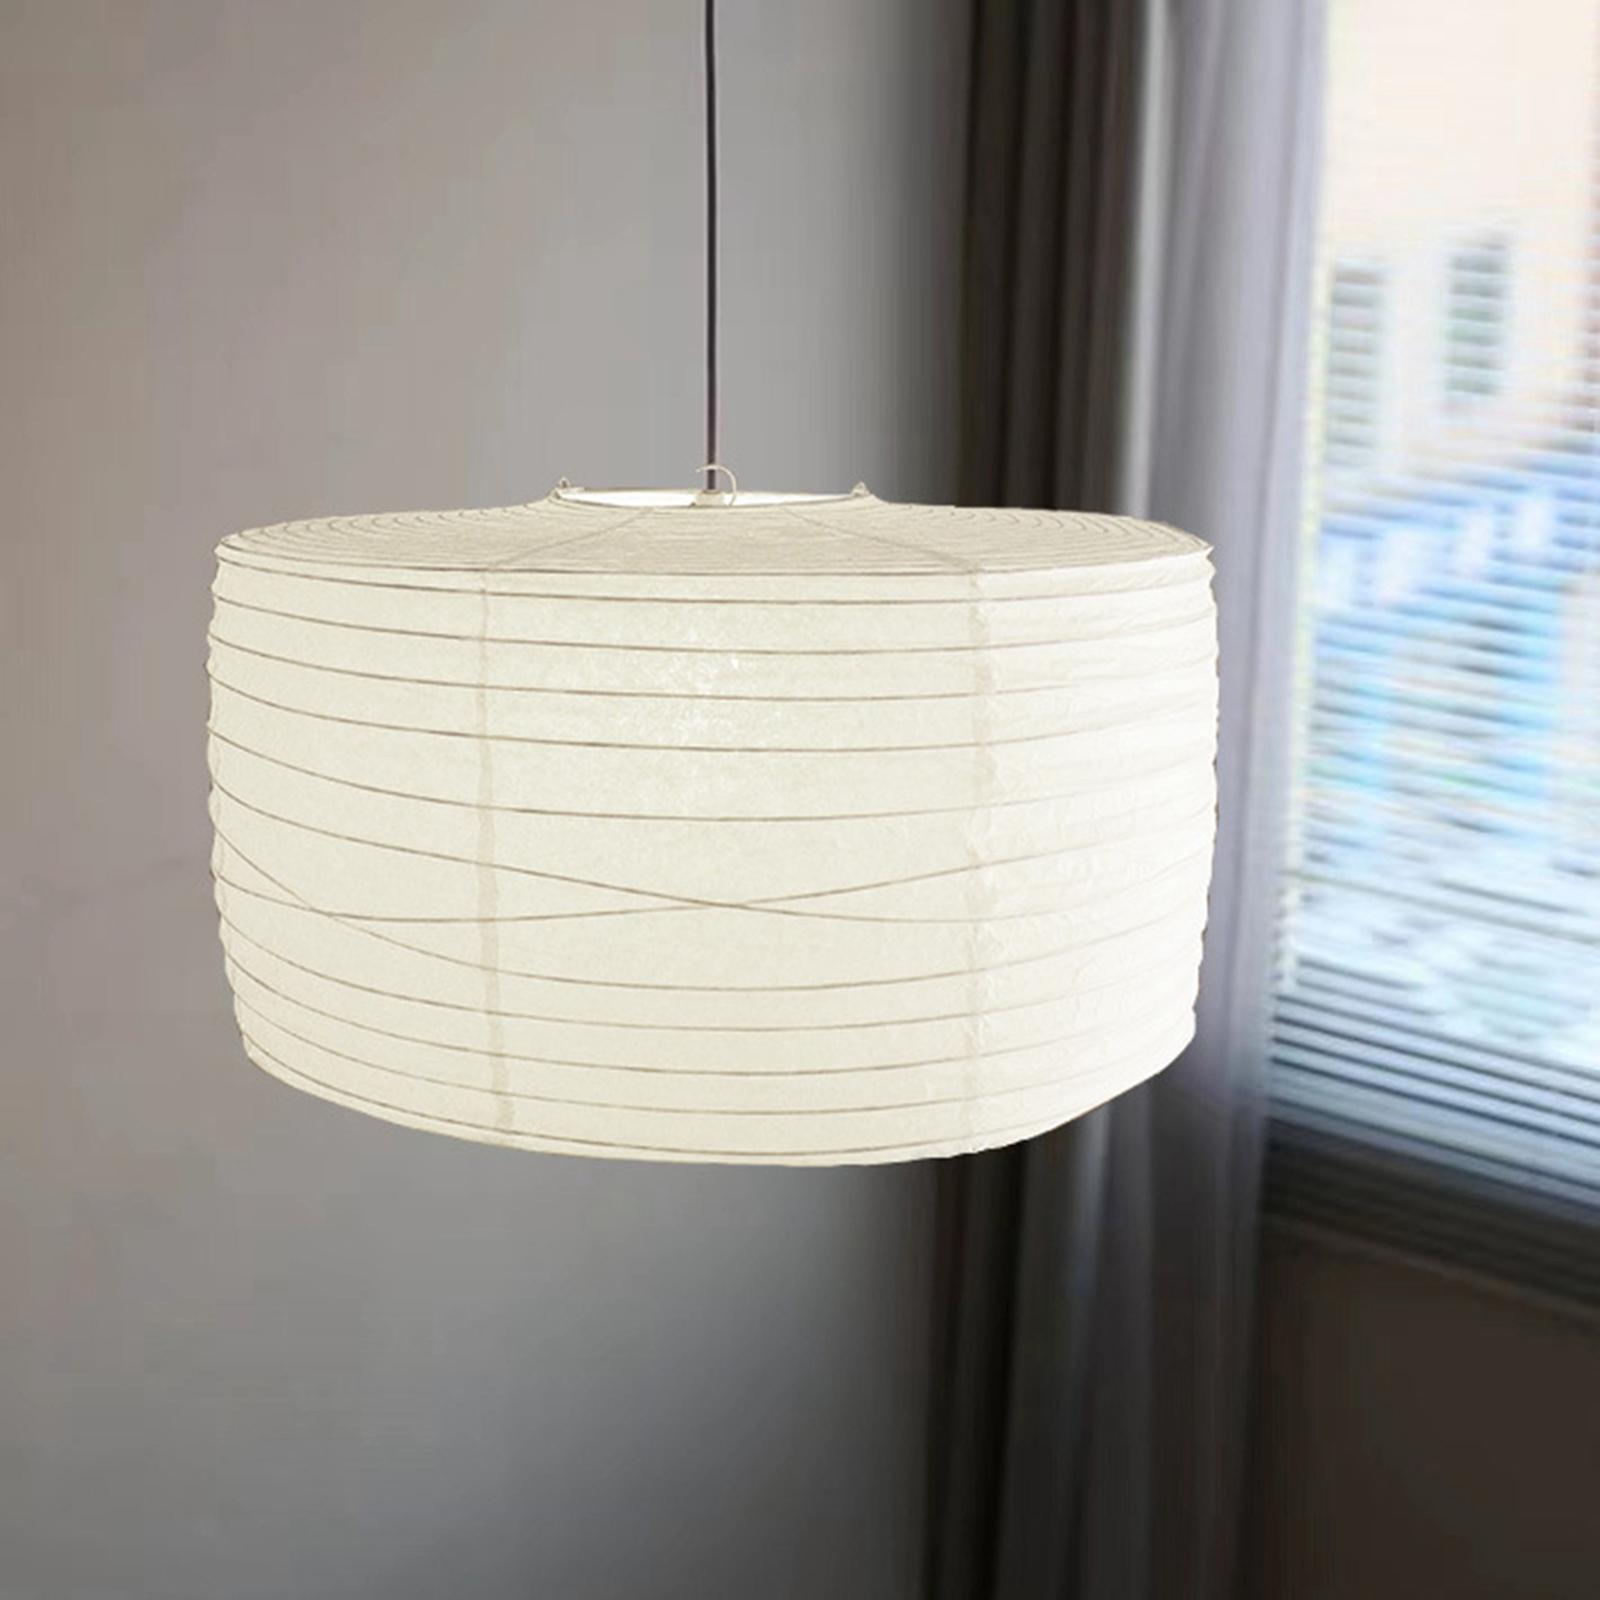 Paper Lamp Shades Hanging Lamp Shade Home Decor Light Accessories Paper Lantern Floor Lamp Shades for Ceiling Pendant Lights Party Birthday